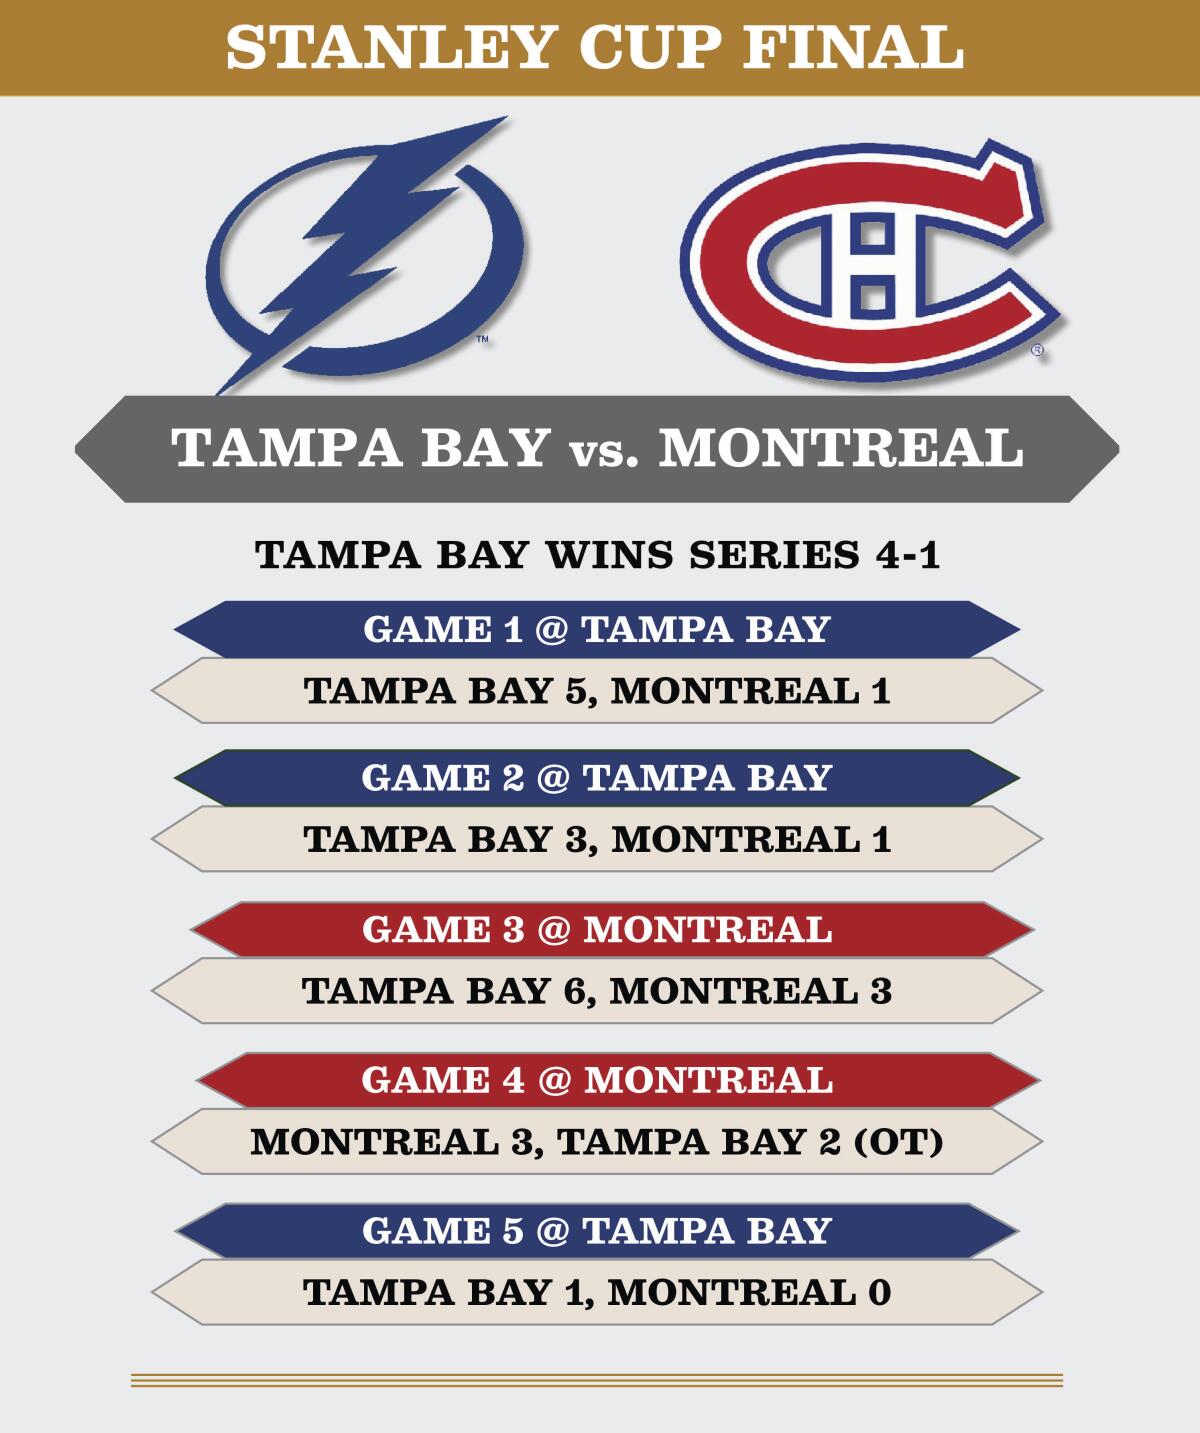 The Tampa Bay Lightning win the Stanley Cup in five games over the Montreal Canadiens.